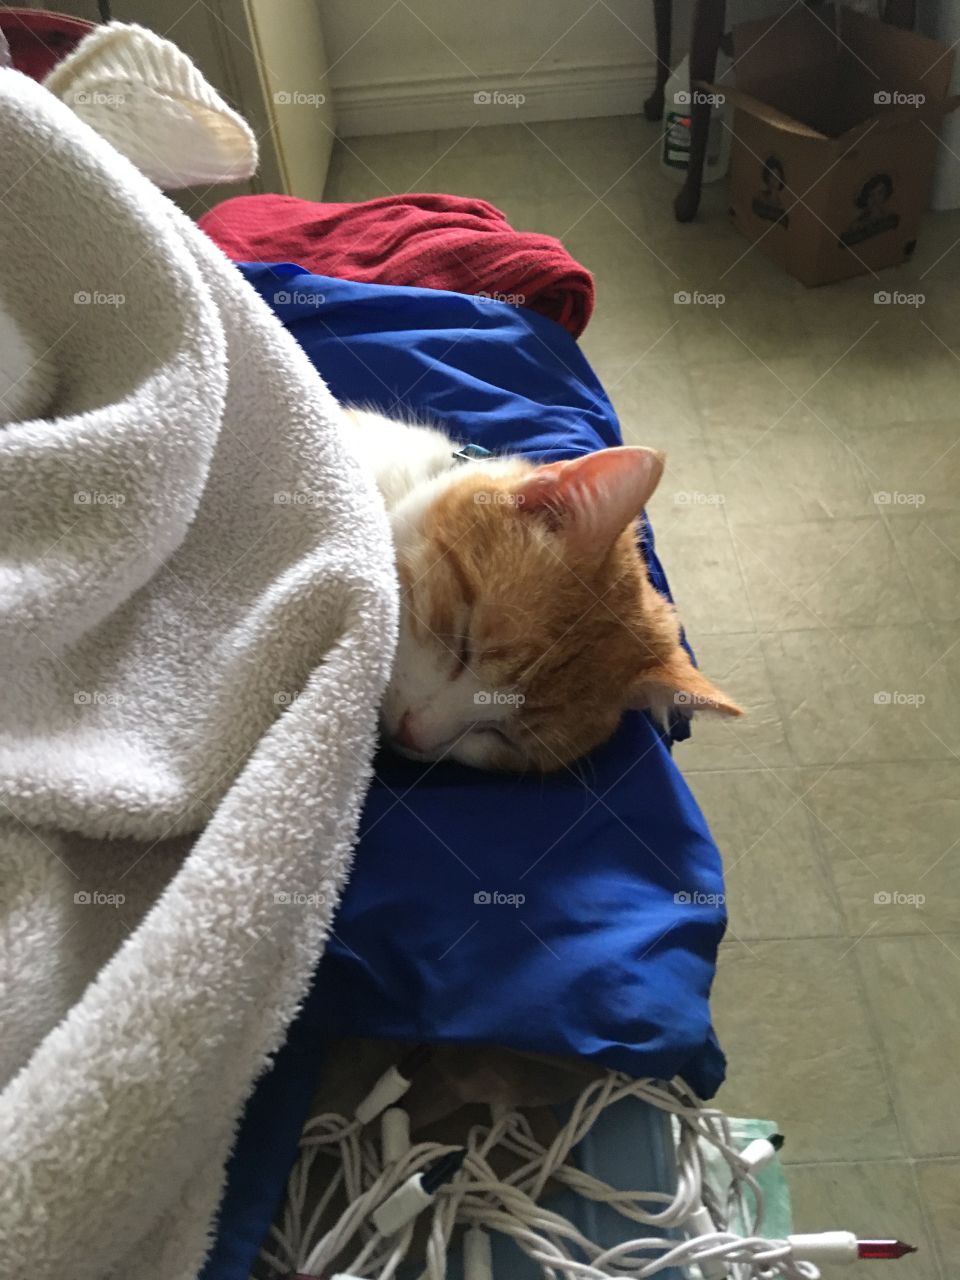 Tom taking a nap under my robe on top of some totes and stuff. Sleepy baby zzzzz!